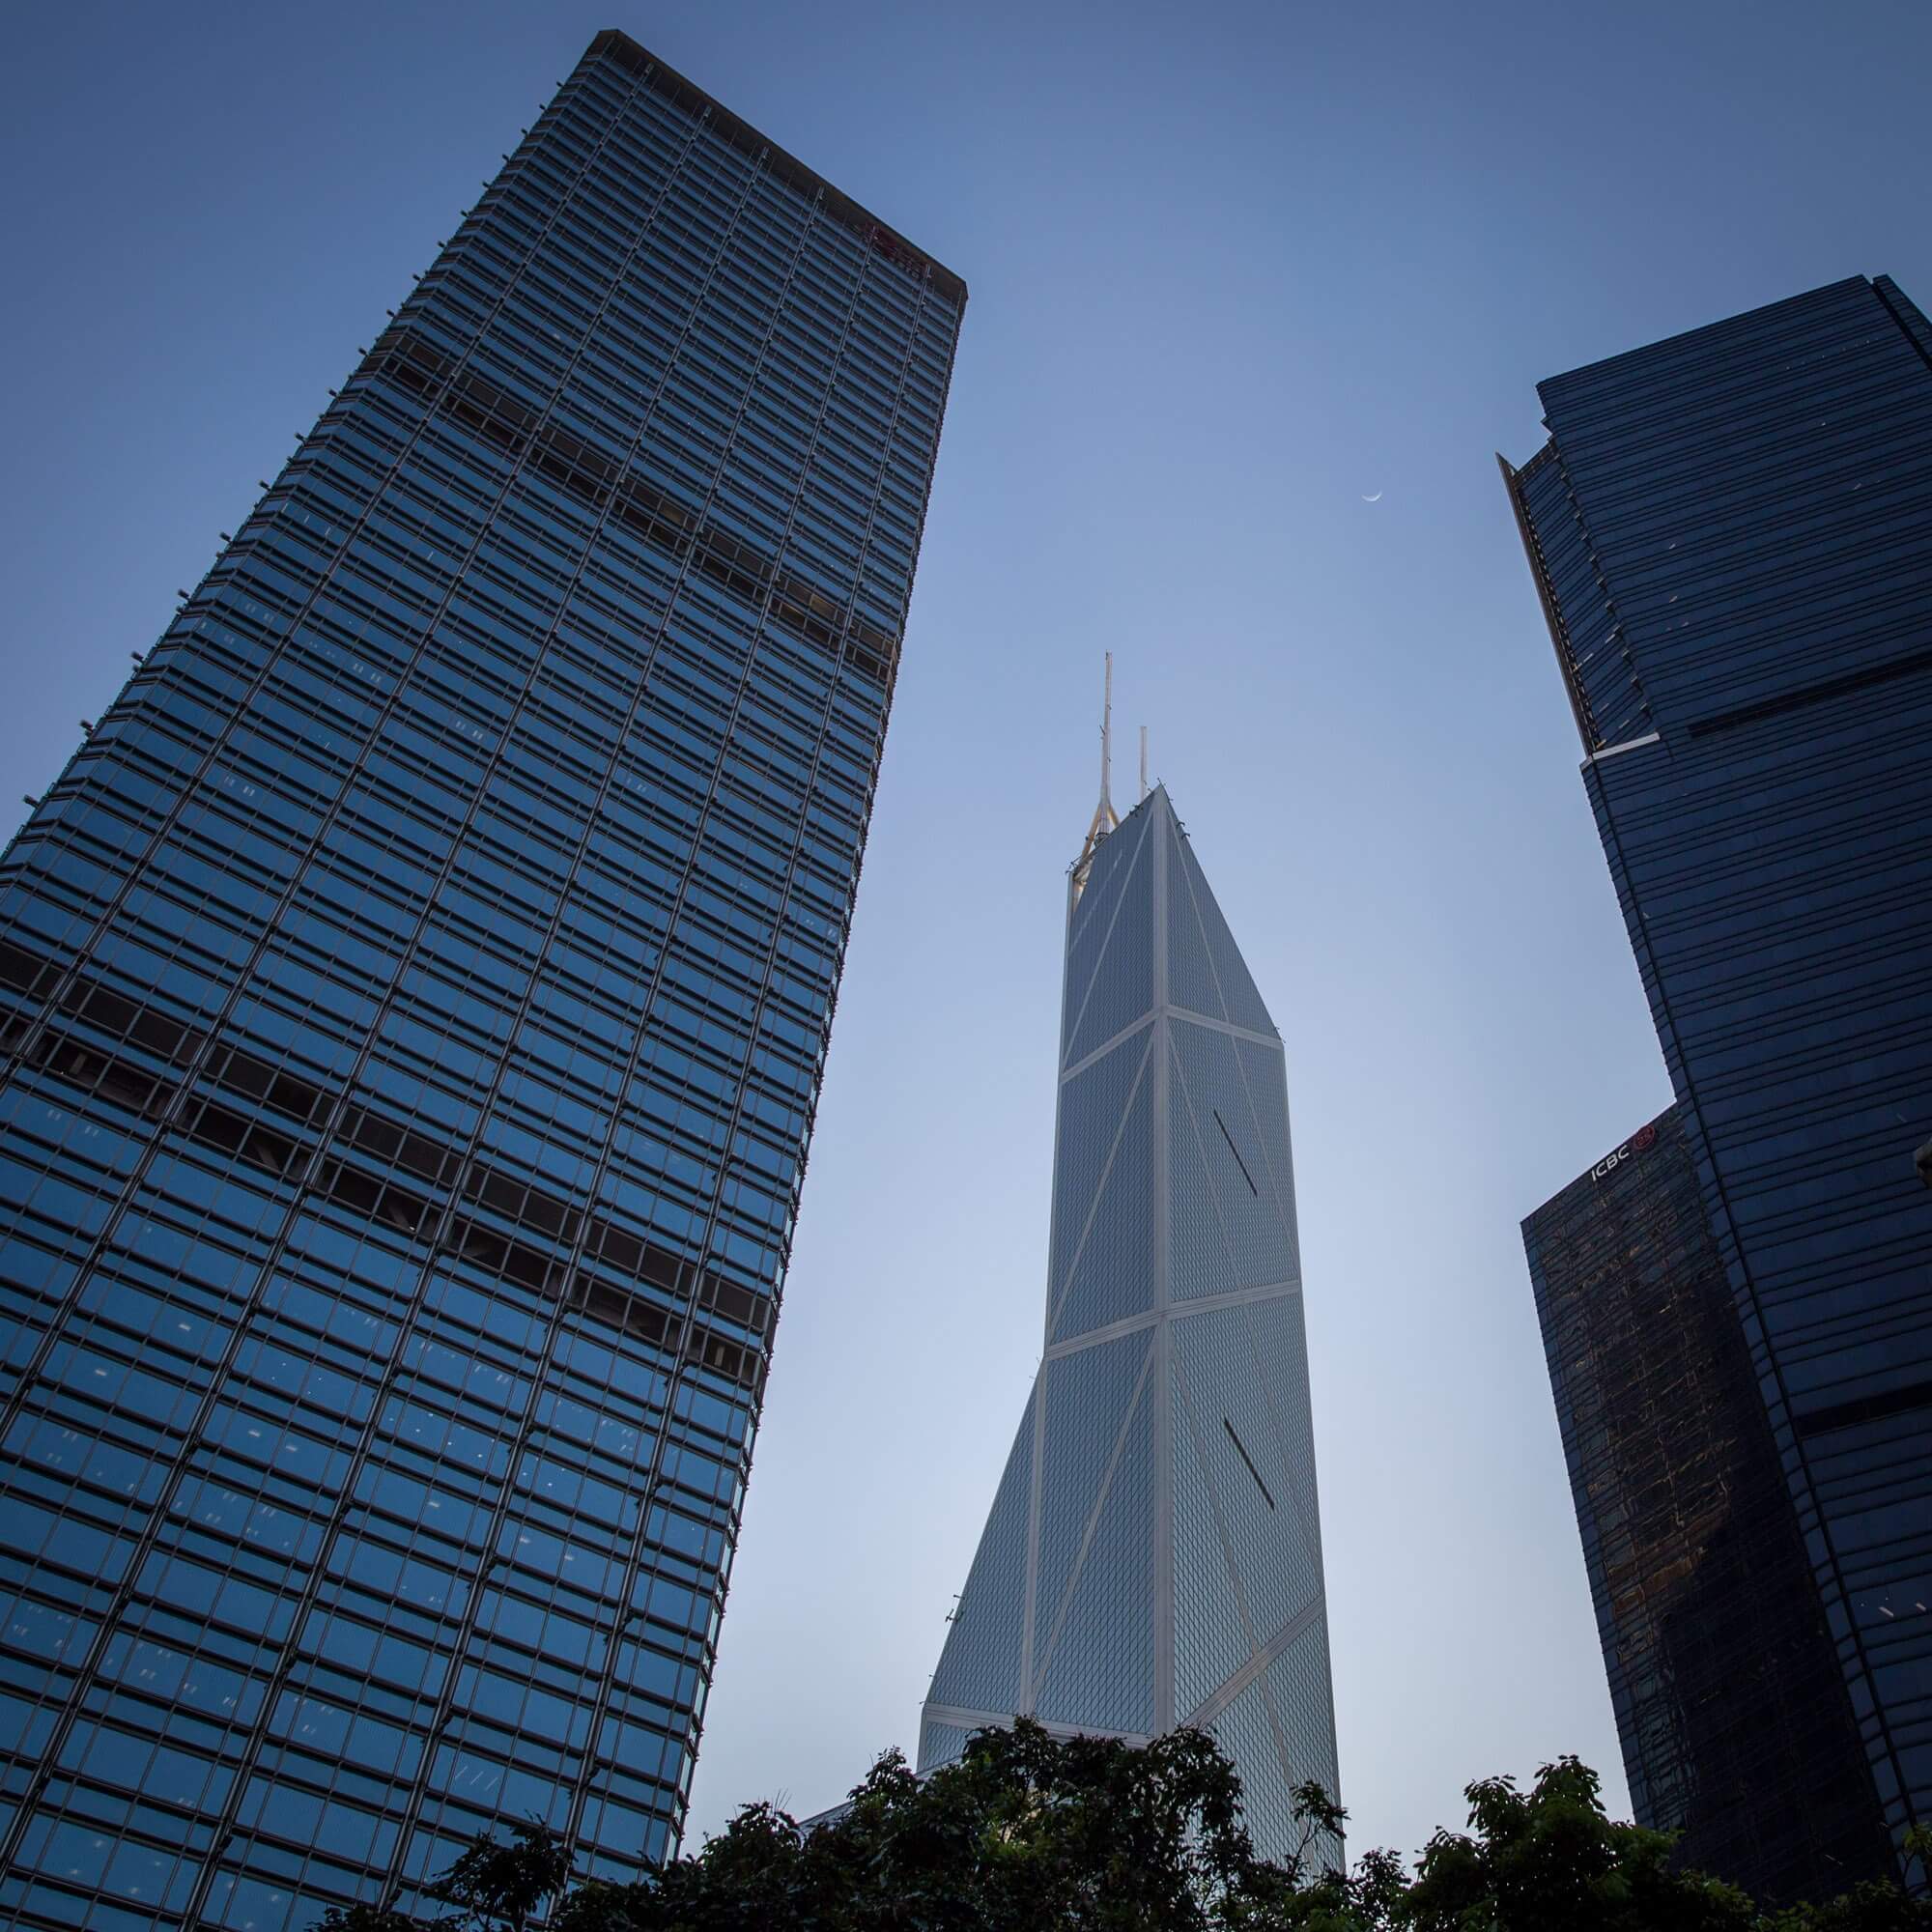 Skyscrapers in Central, including the Bank of China tower